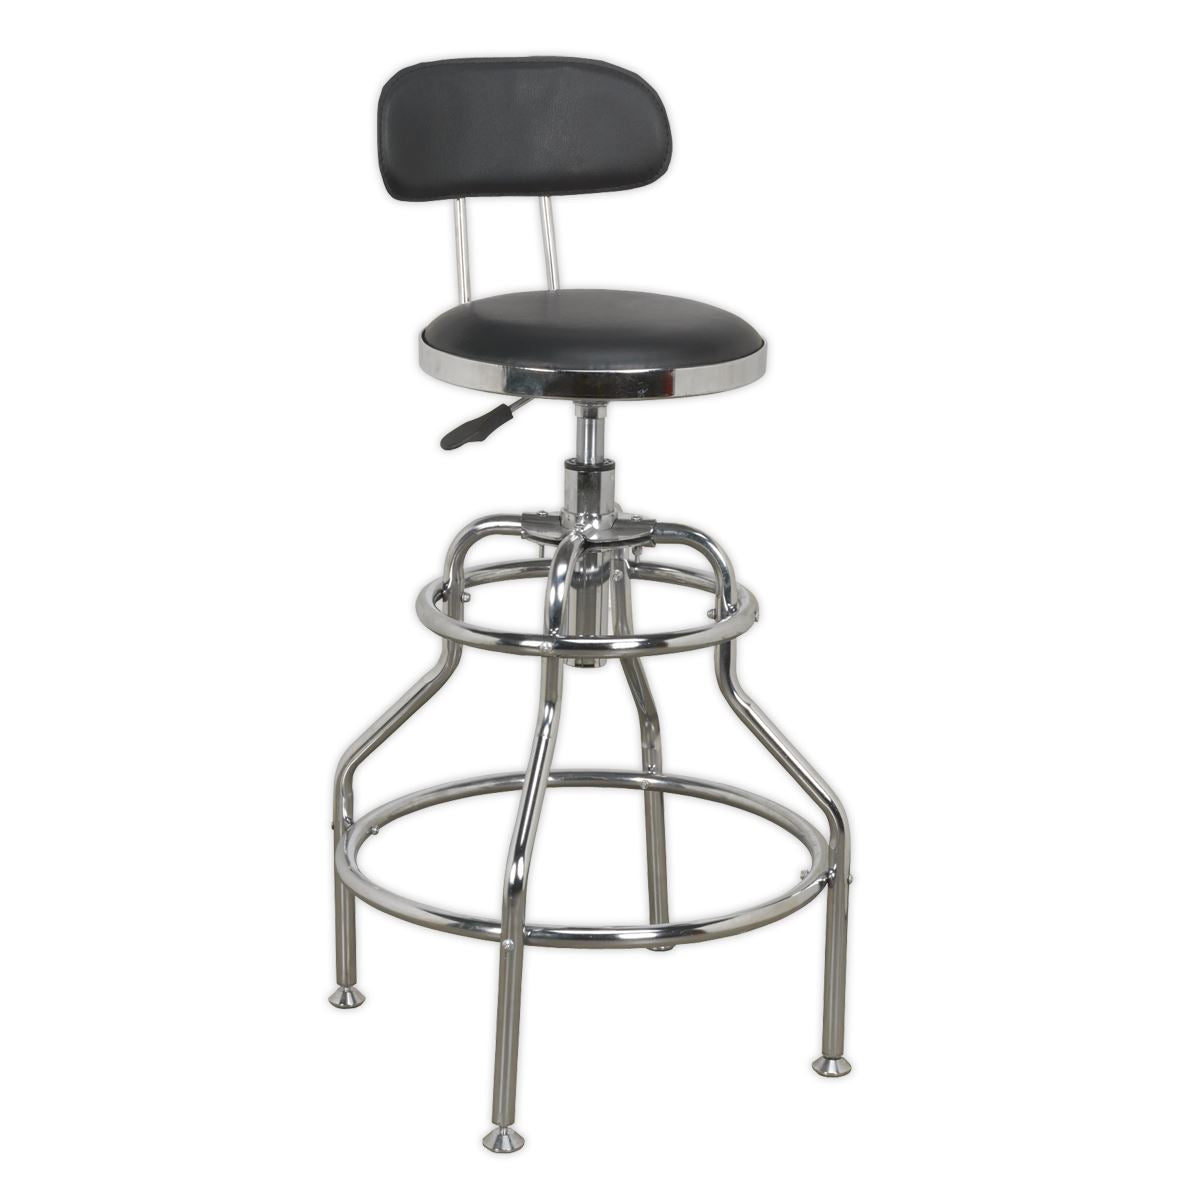 Sealey Pneumatic Workshop Stool with Adjustable Height Swivel Seat & Back Rest